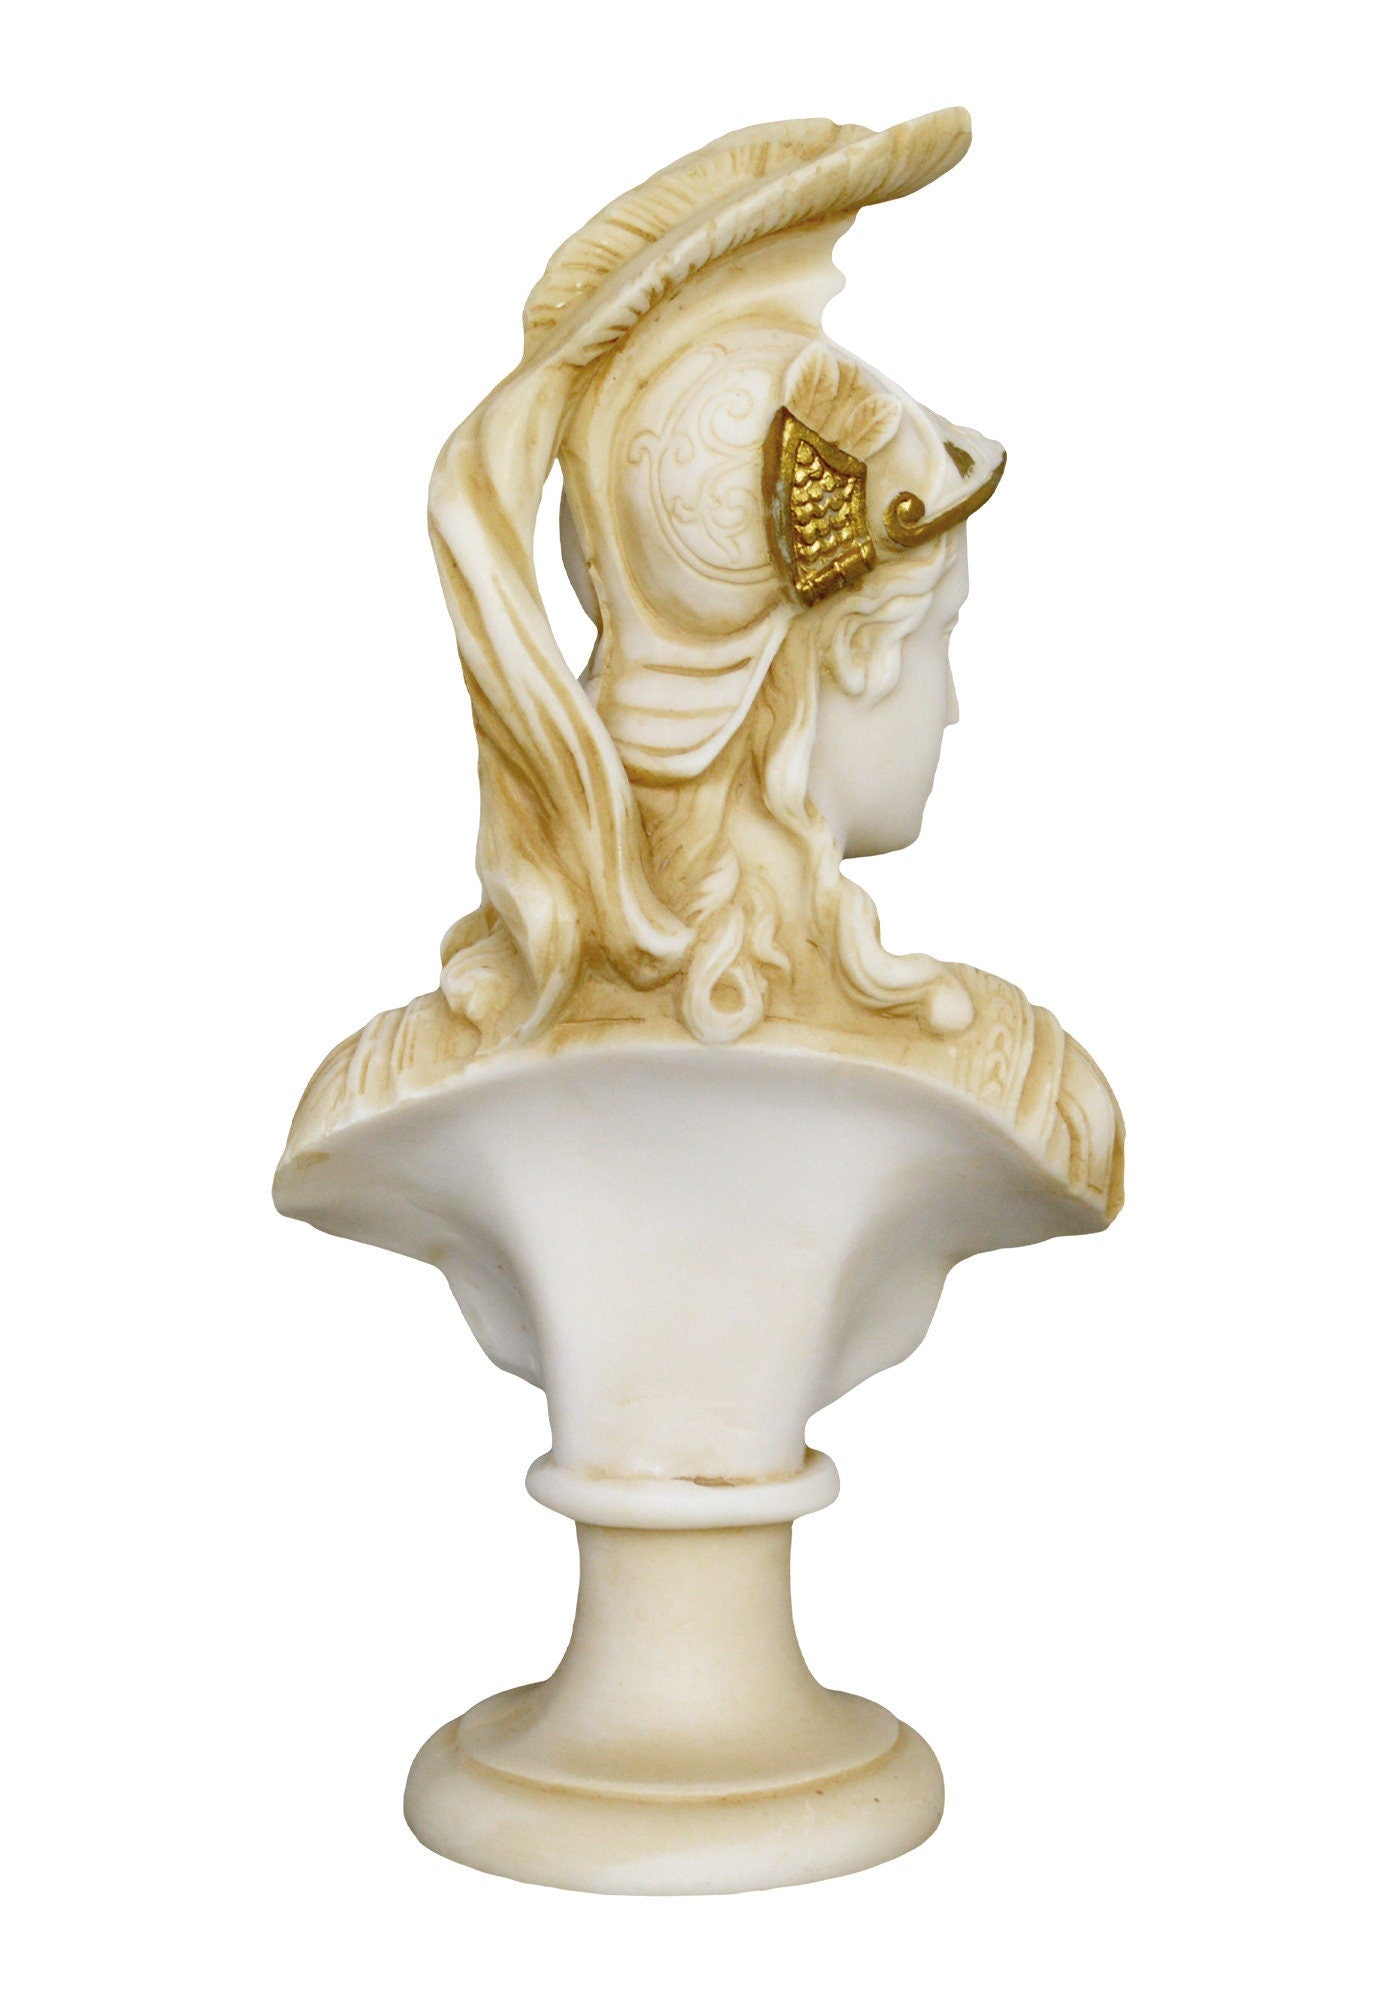 Athena Minerva Bust - Greek Roman Goddes of Wisdom, Strength, Strategy, Courage, Inspiration, Arts, Crafts, and Skill - Aged Alabaster